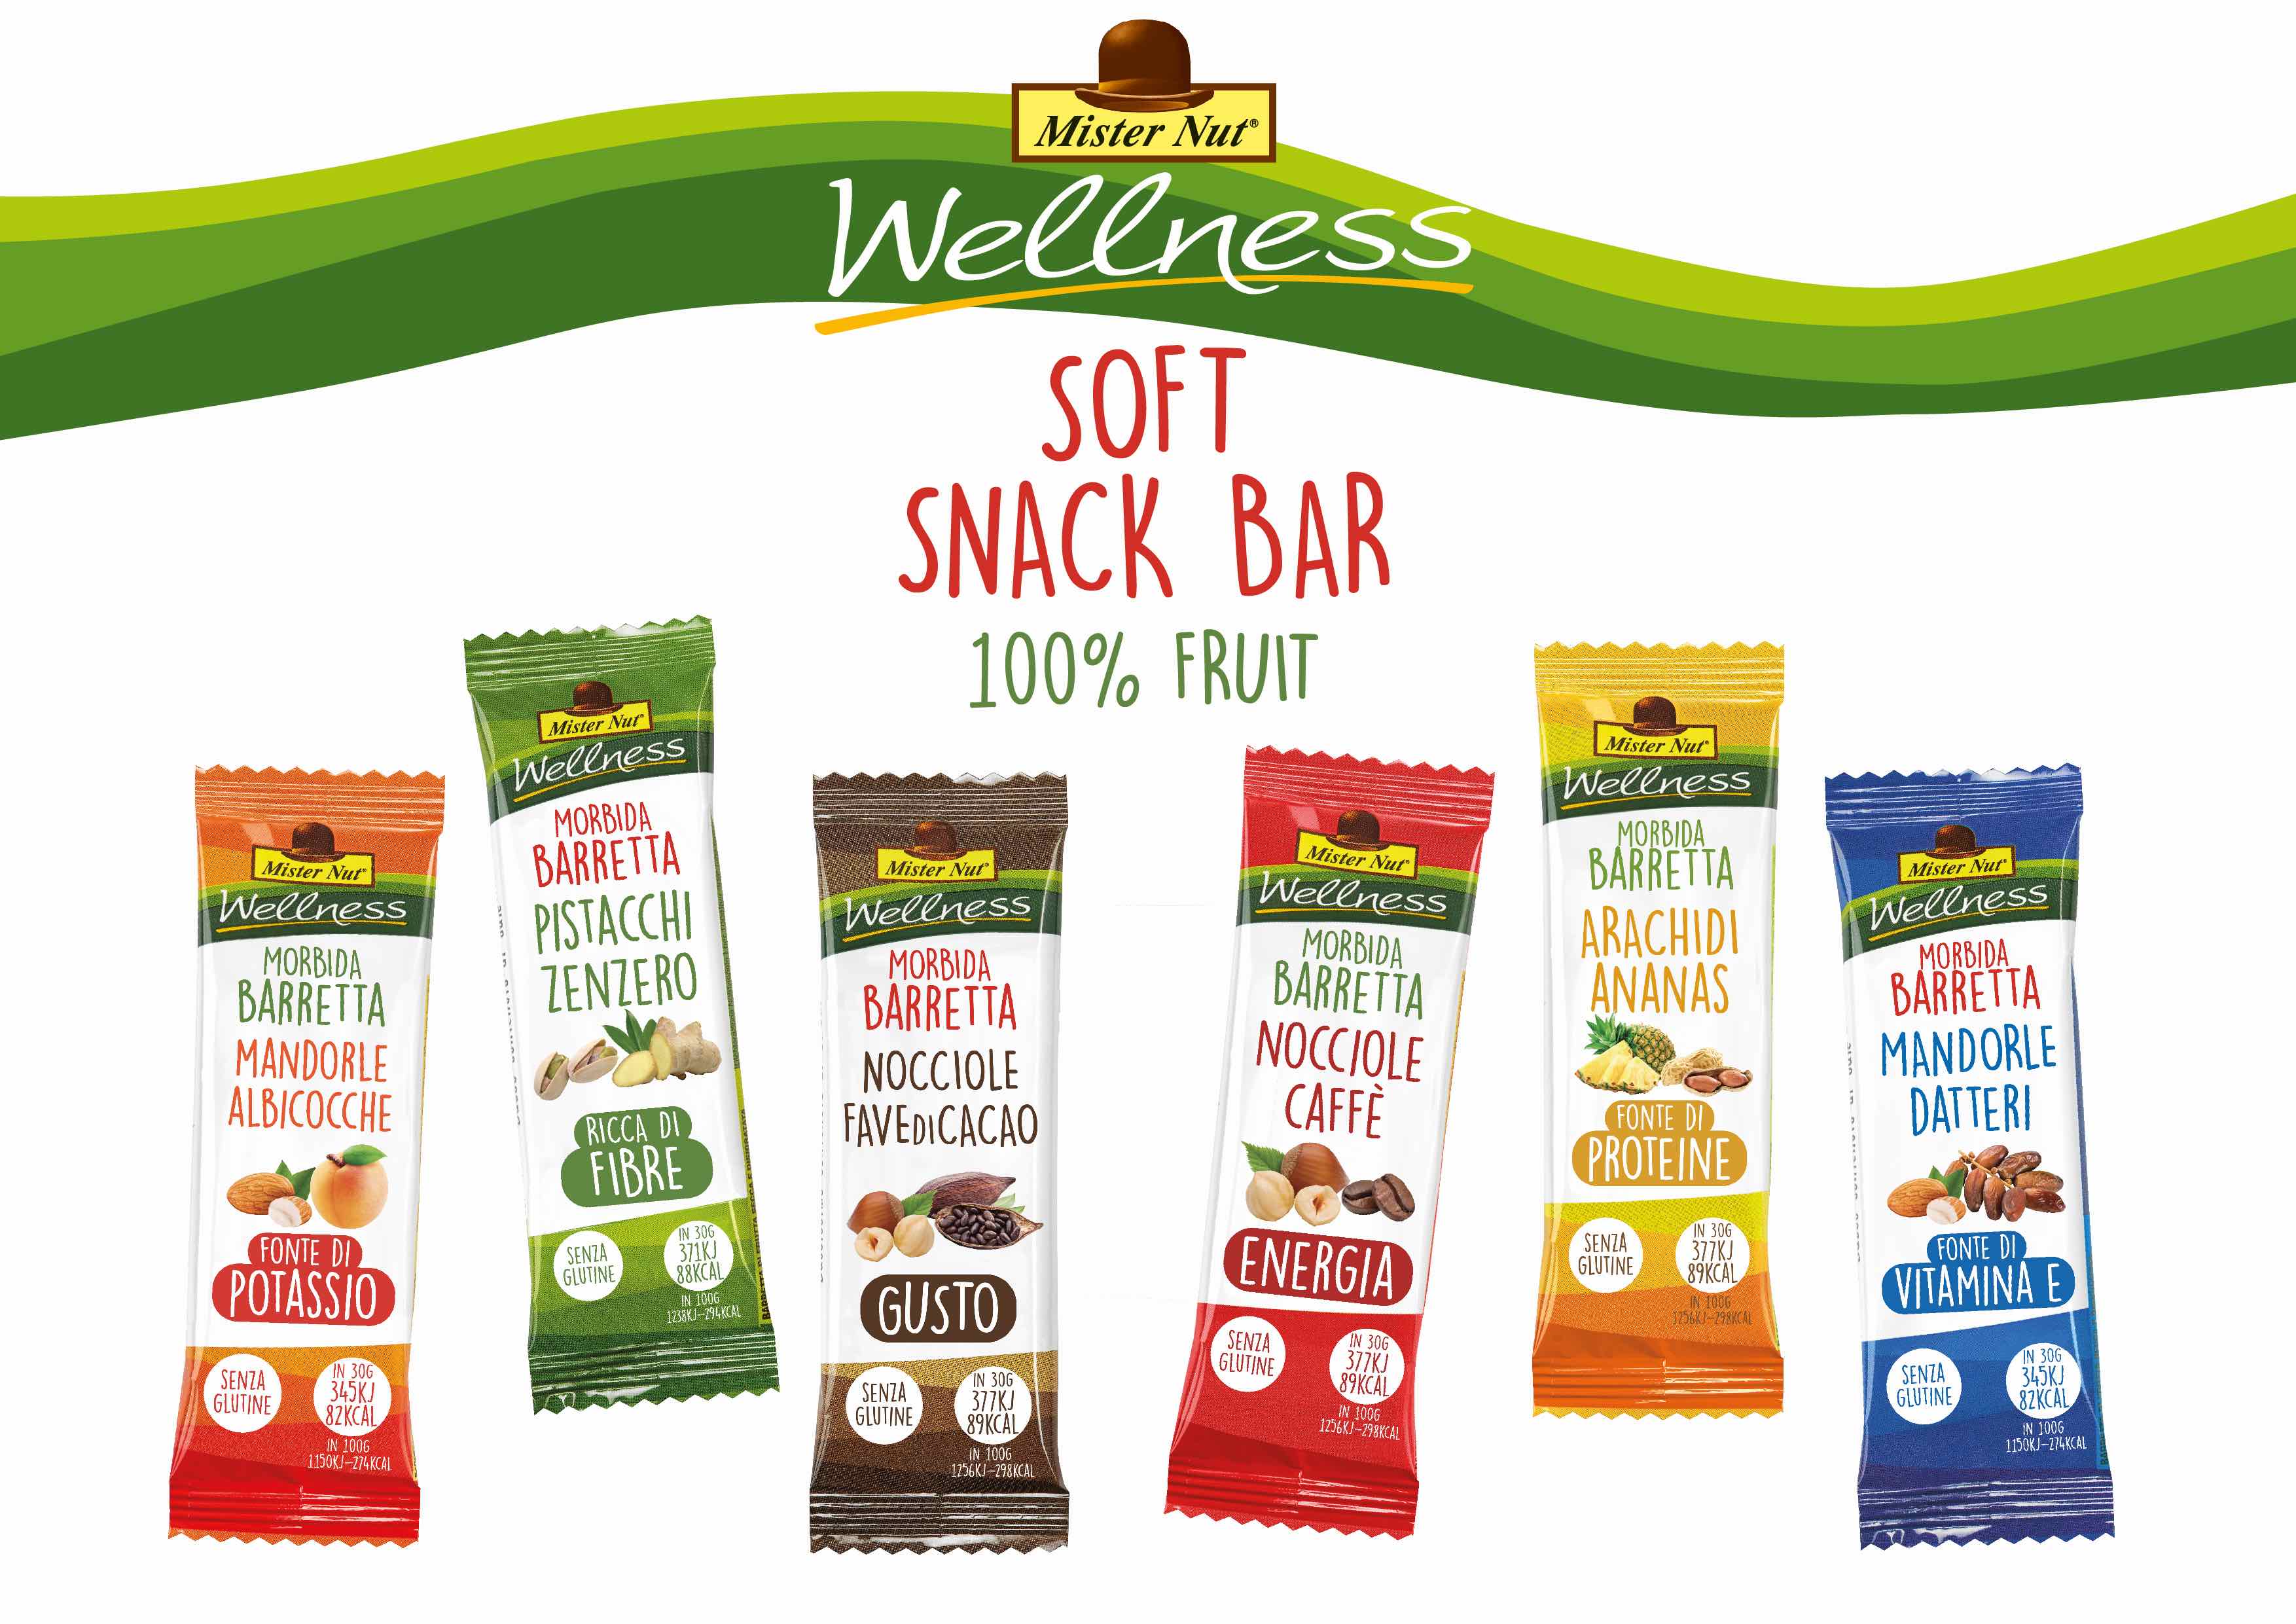 SOFT SNACK WELLESS 100% NUTS AND FRUIT